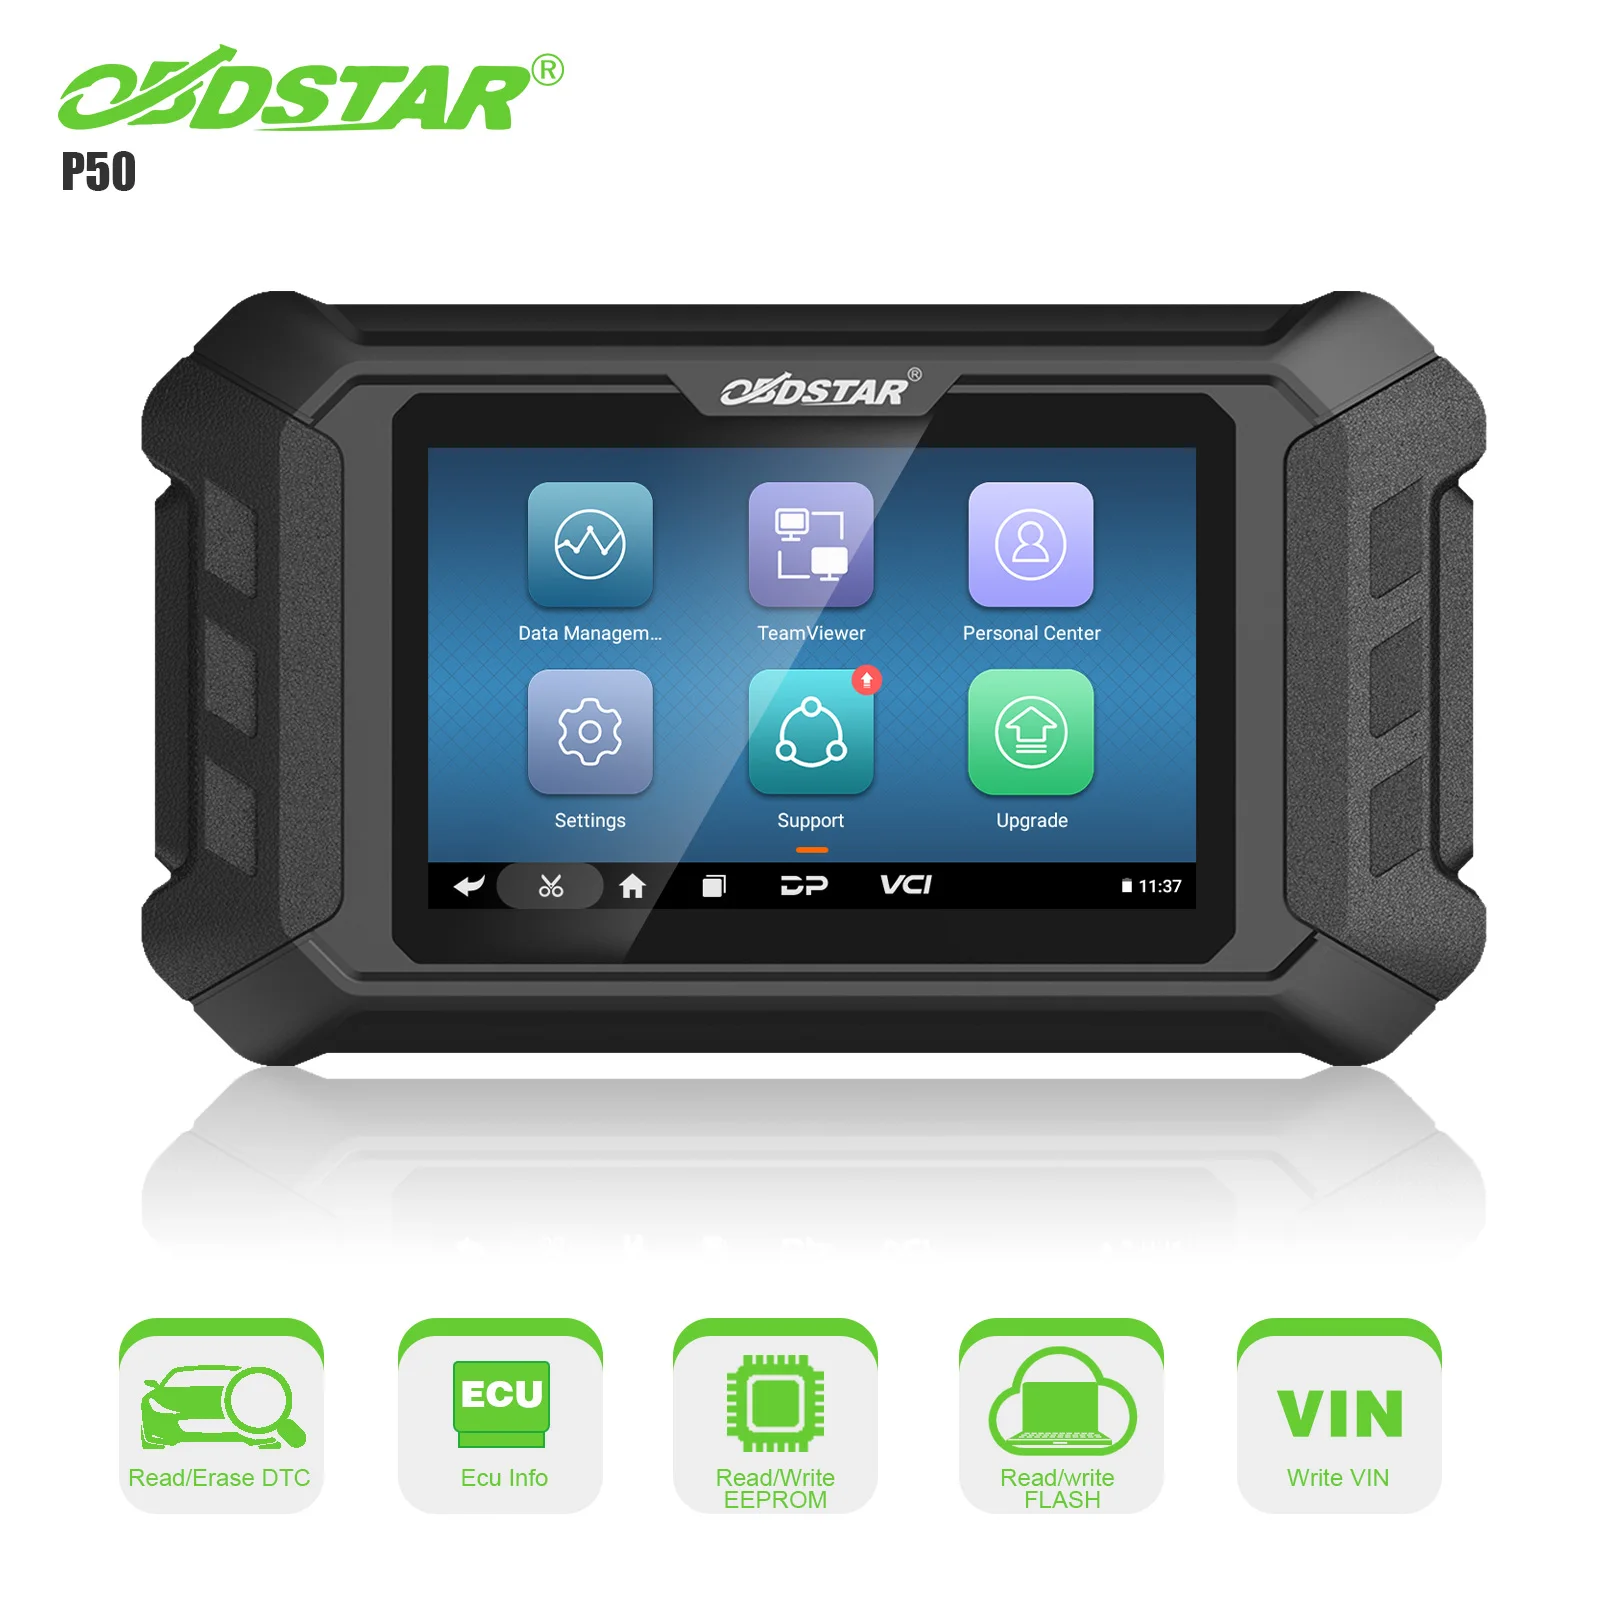 2022 NEW OBDSTAR P50 Airbag Reset + PINCODE Intelligent Airbag Reset Equipment Covers 38 Brands and Over 3000 ECU Part No.